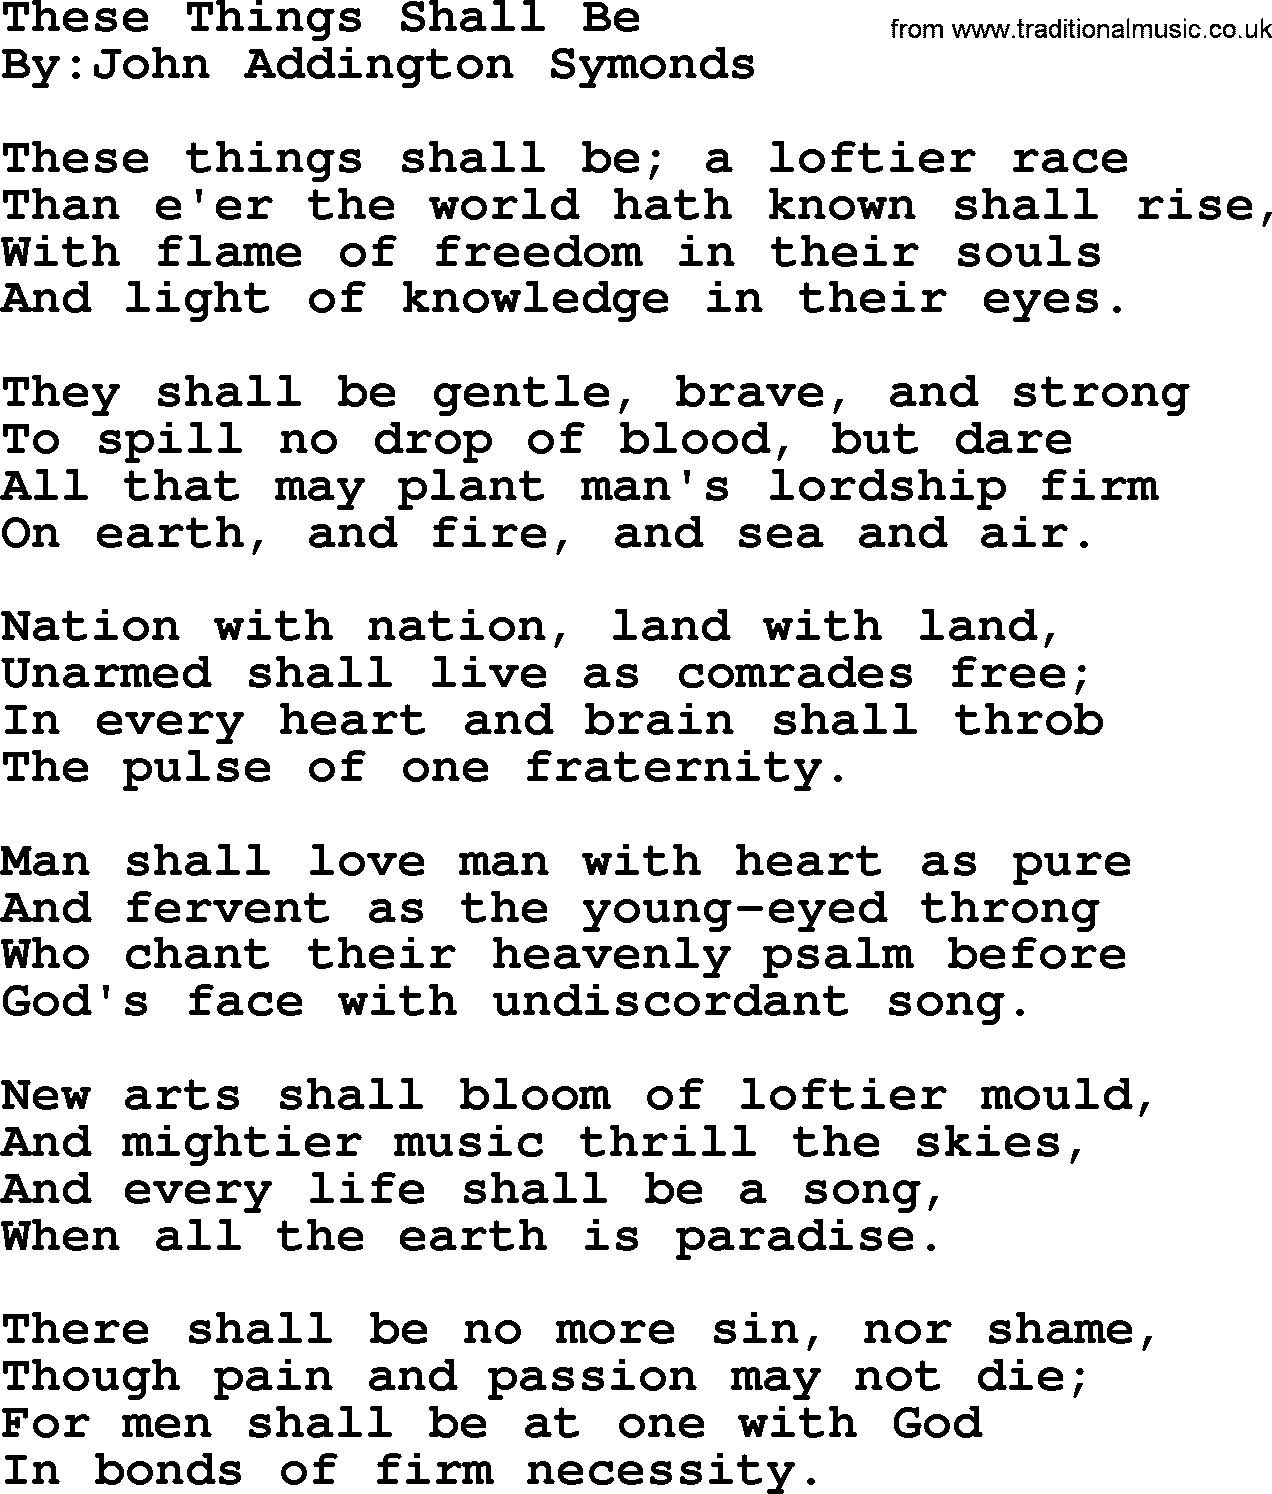 Political, Solidarity, Workers or Union song: These Things Shall Be, lyrics